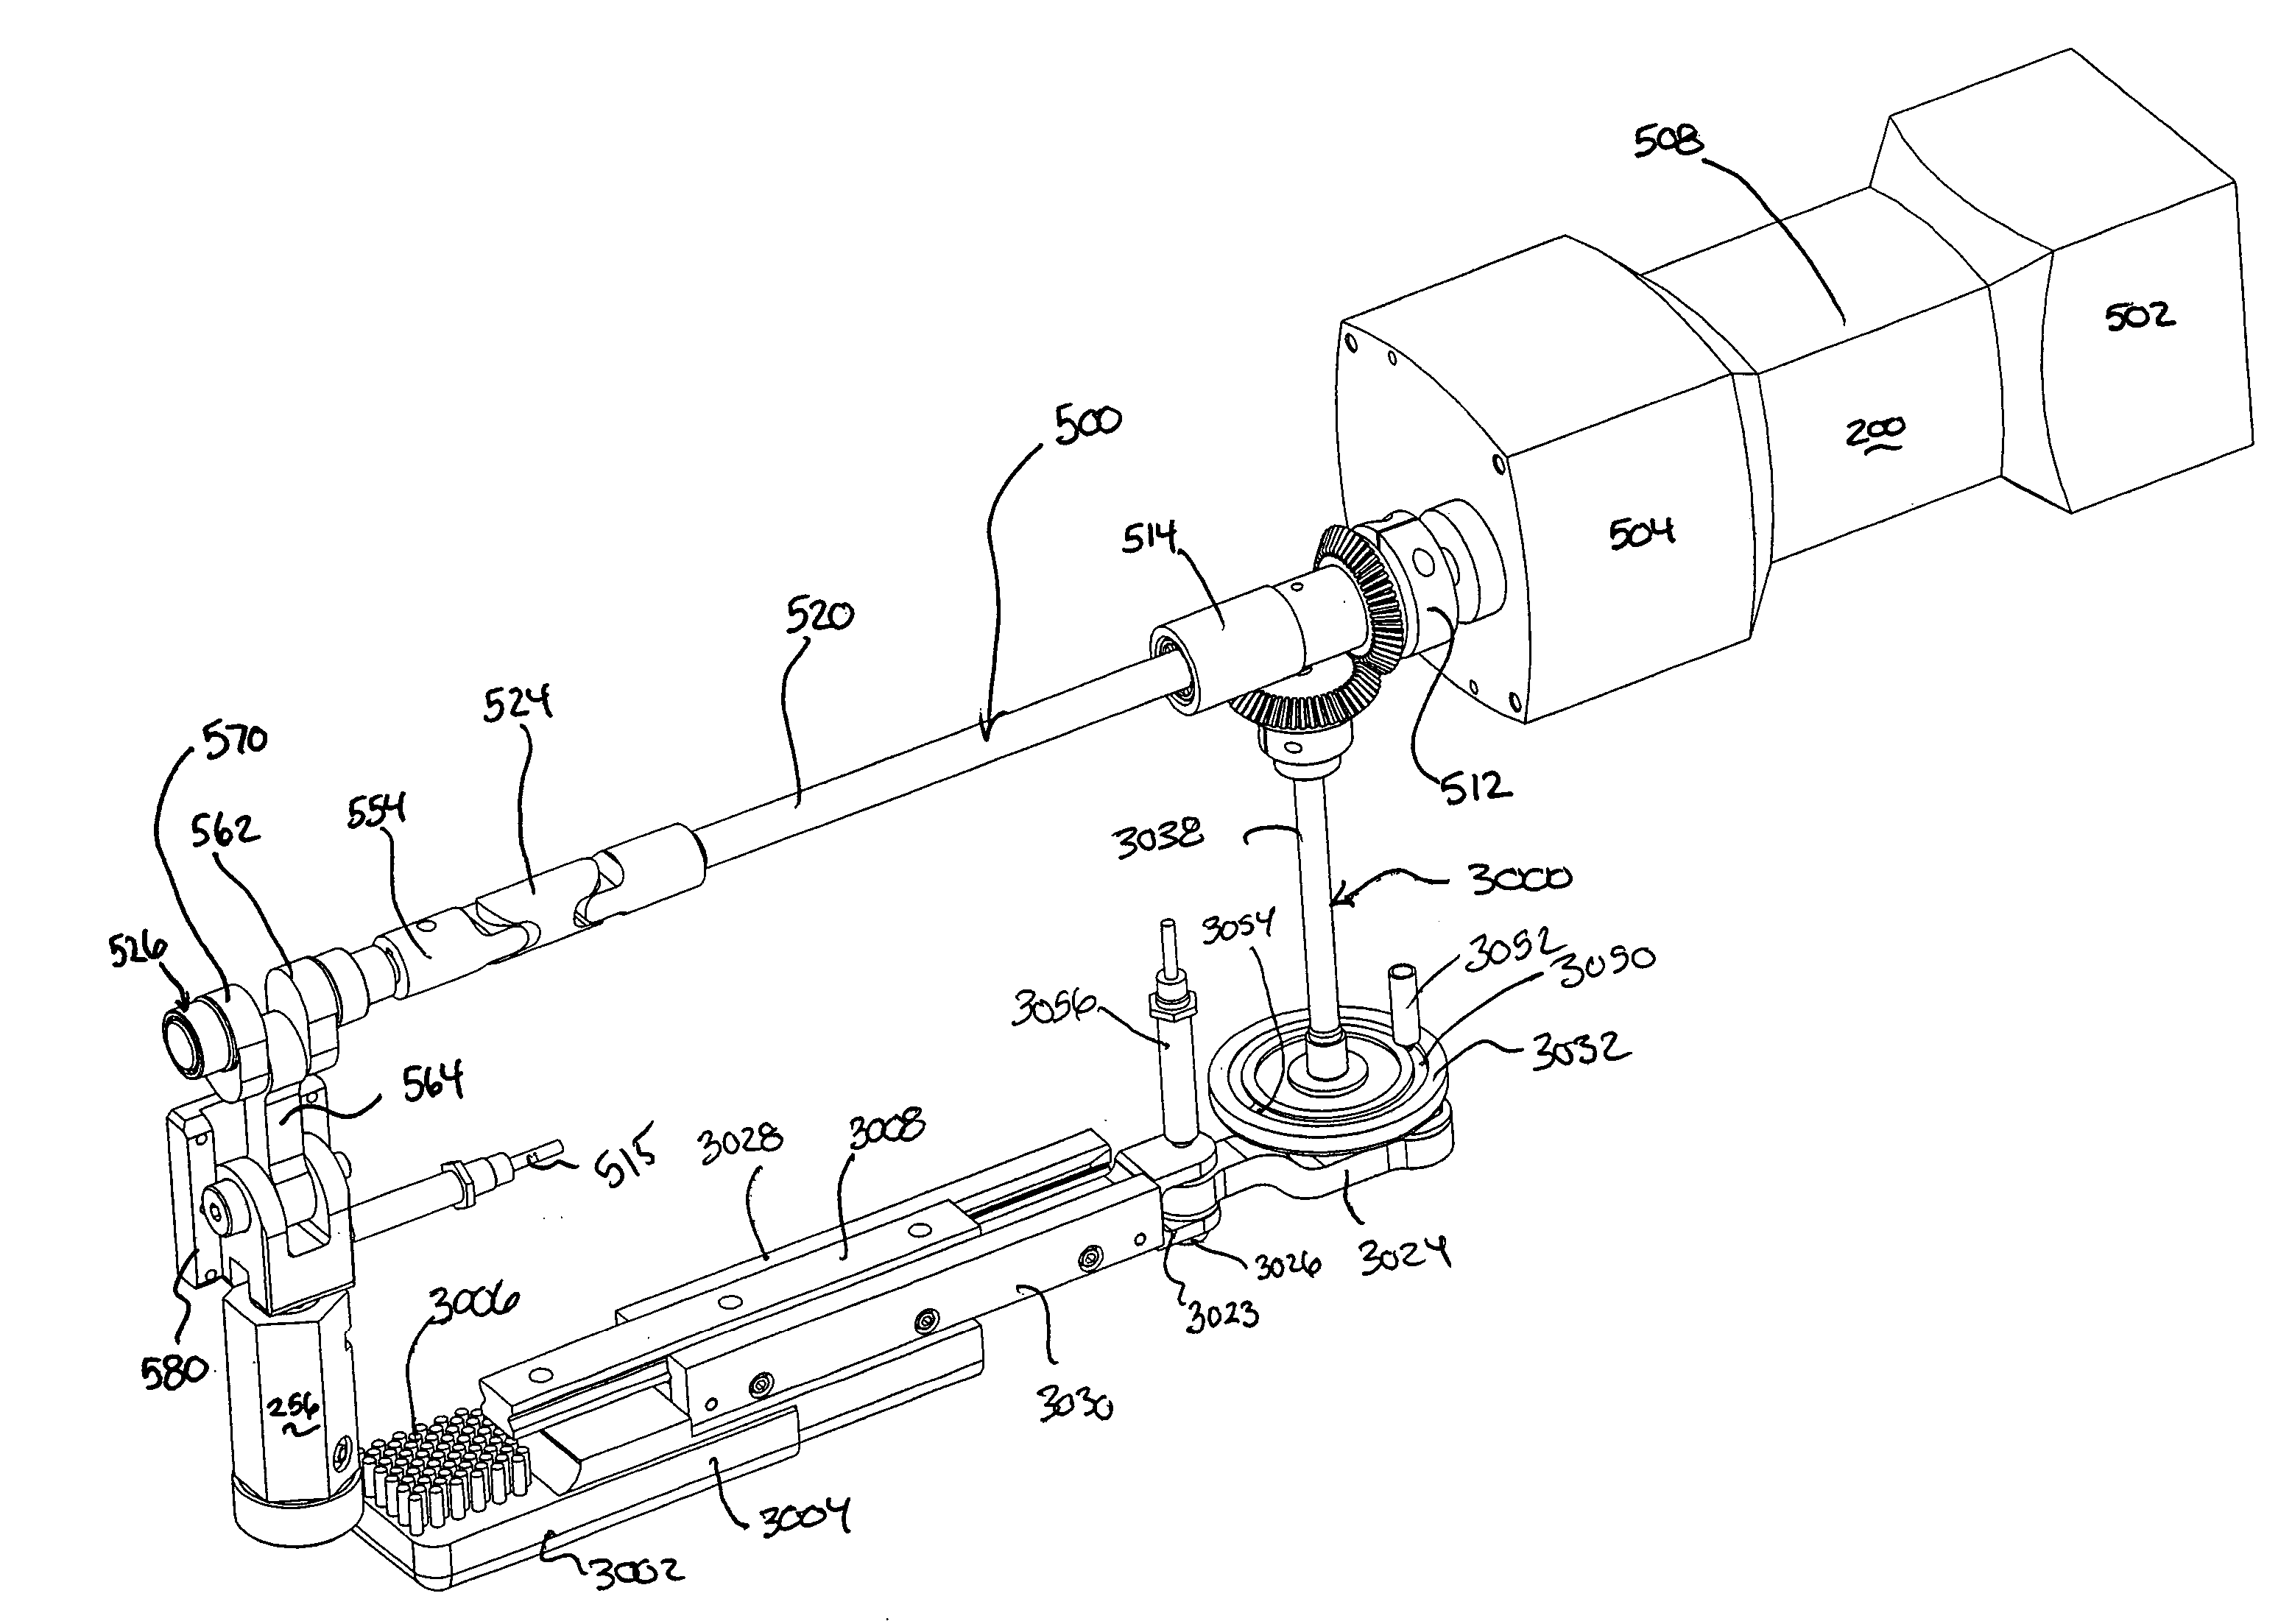 Mixing module drive mechanism and dispensing system with same